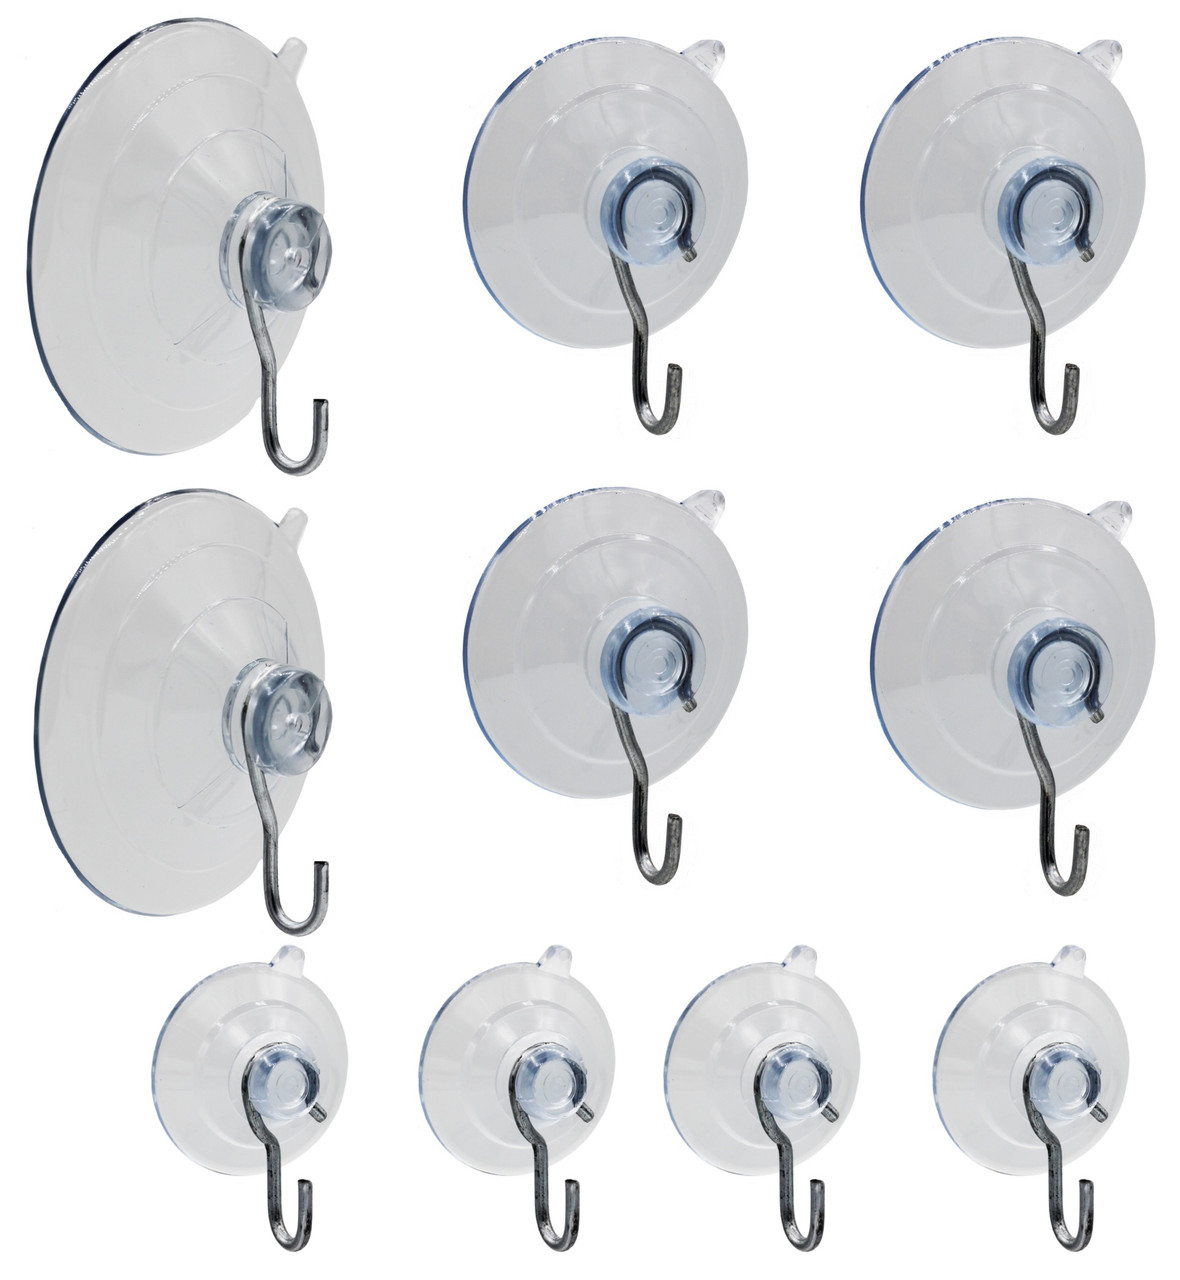 Suction Cup Hooks - 6 Pack Reusable Strong Suction Cup Hooks